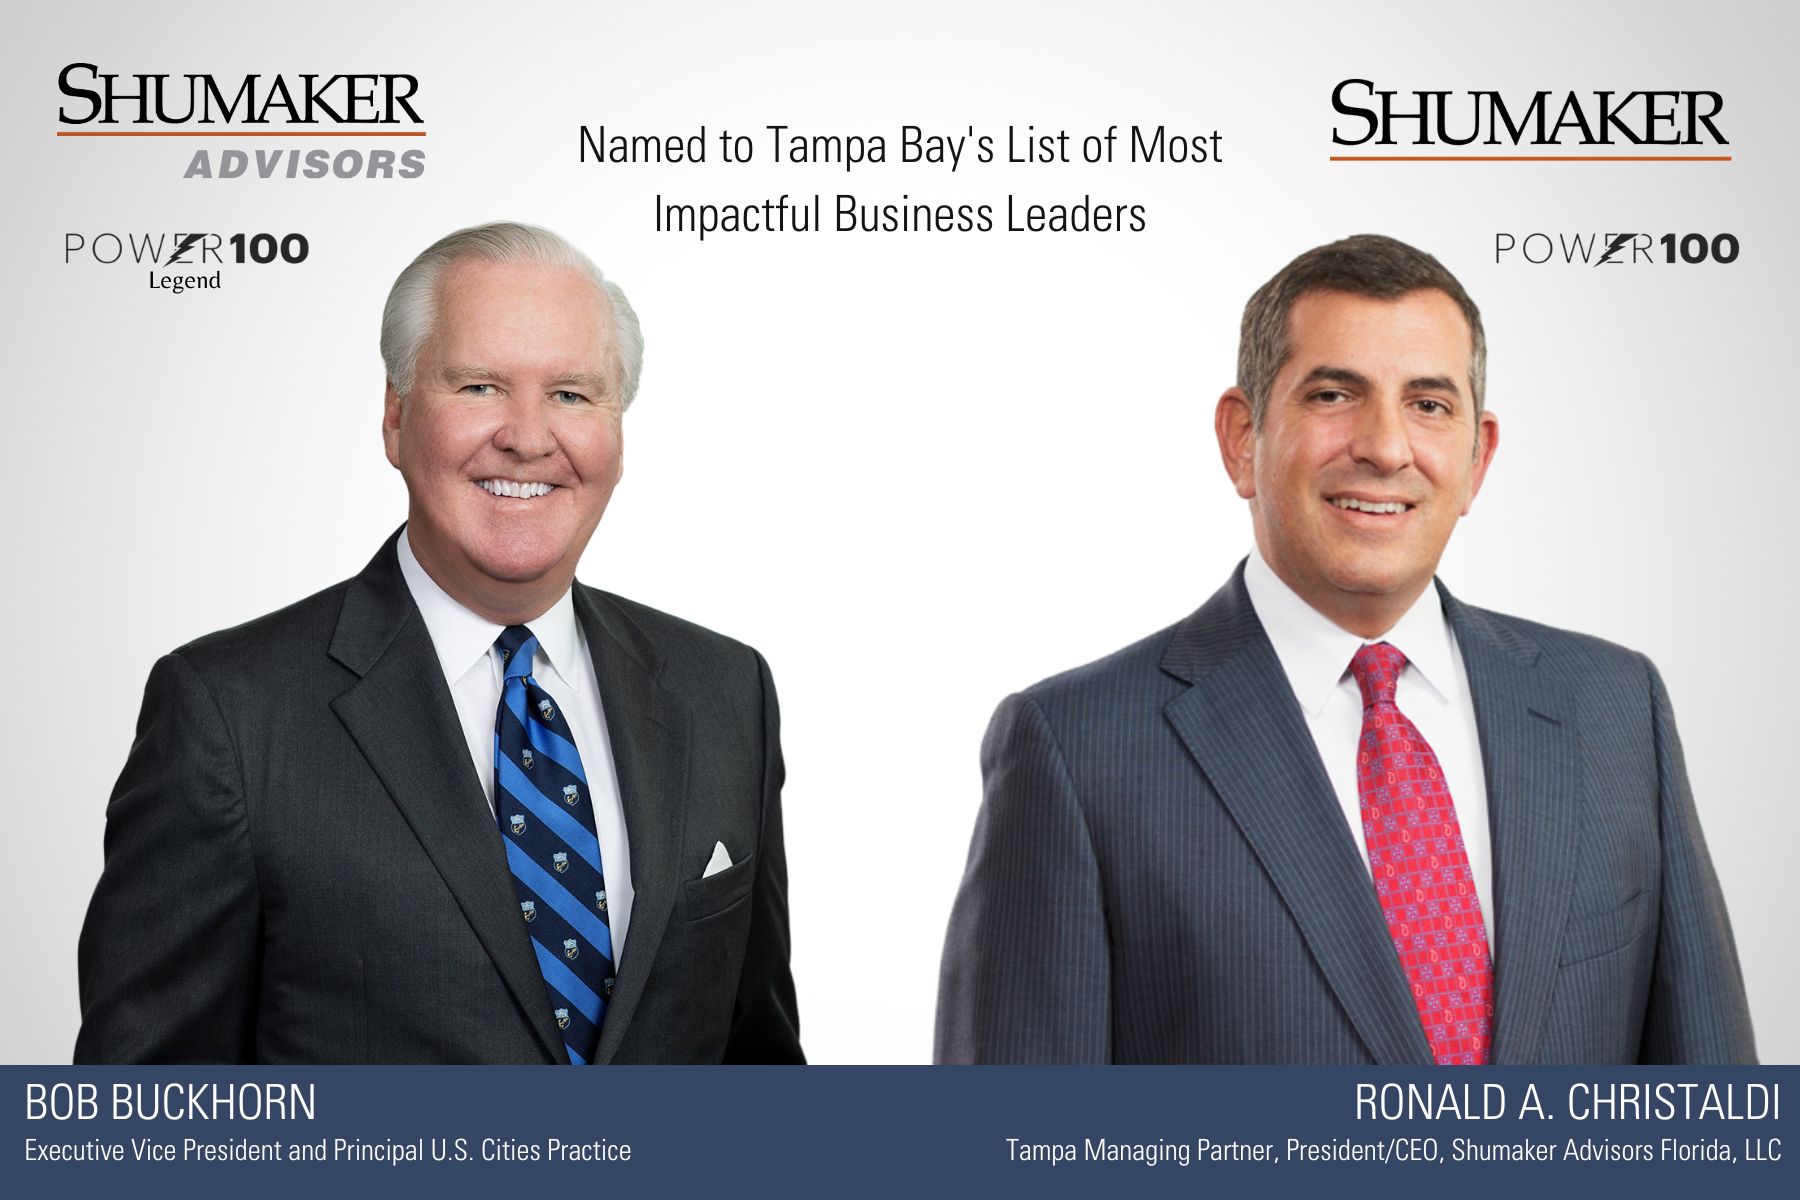 Bob Buckhorn and Ronald A. Christaldi Named to Tampa Bay's List of Most Impactful Business Leaders